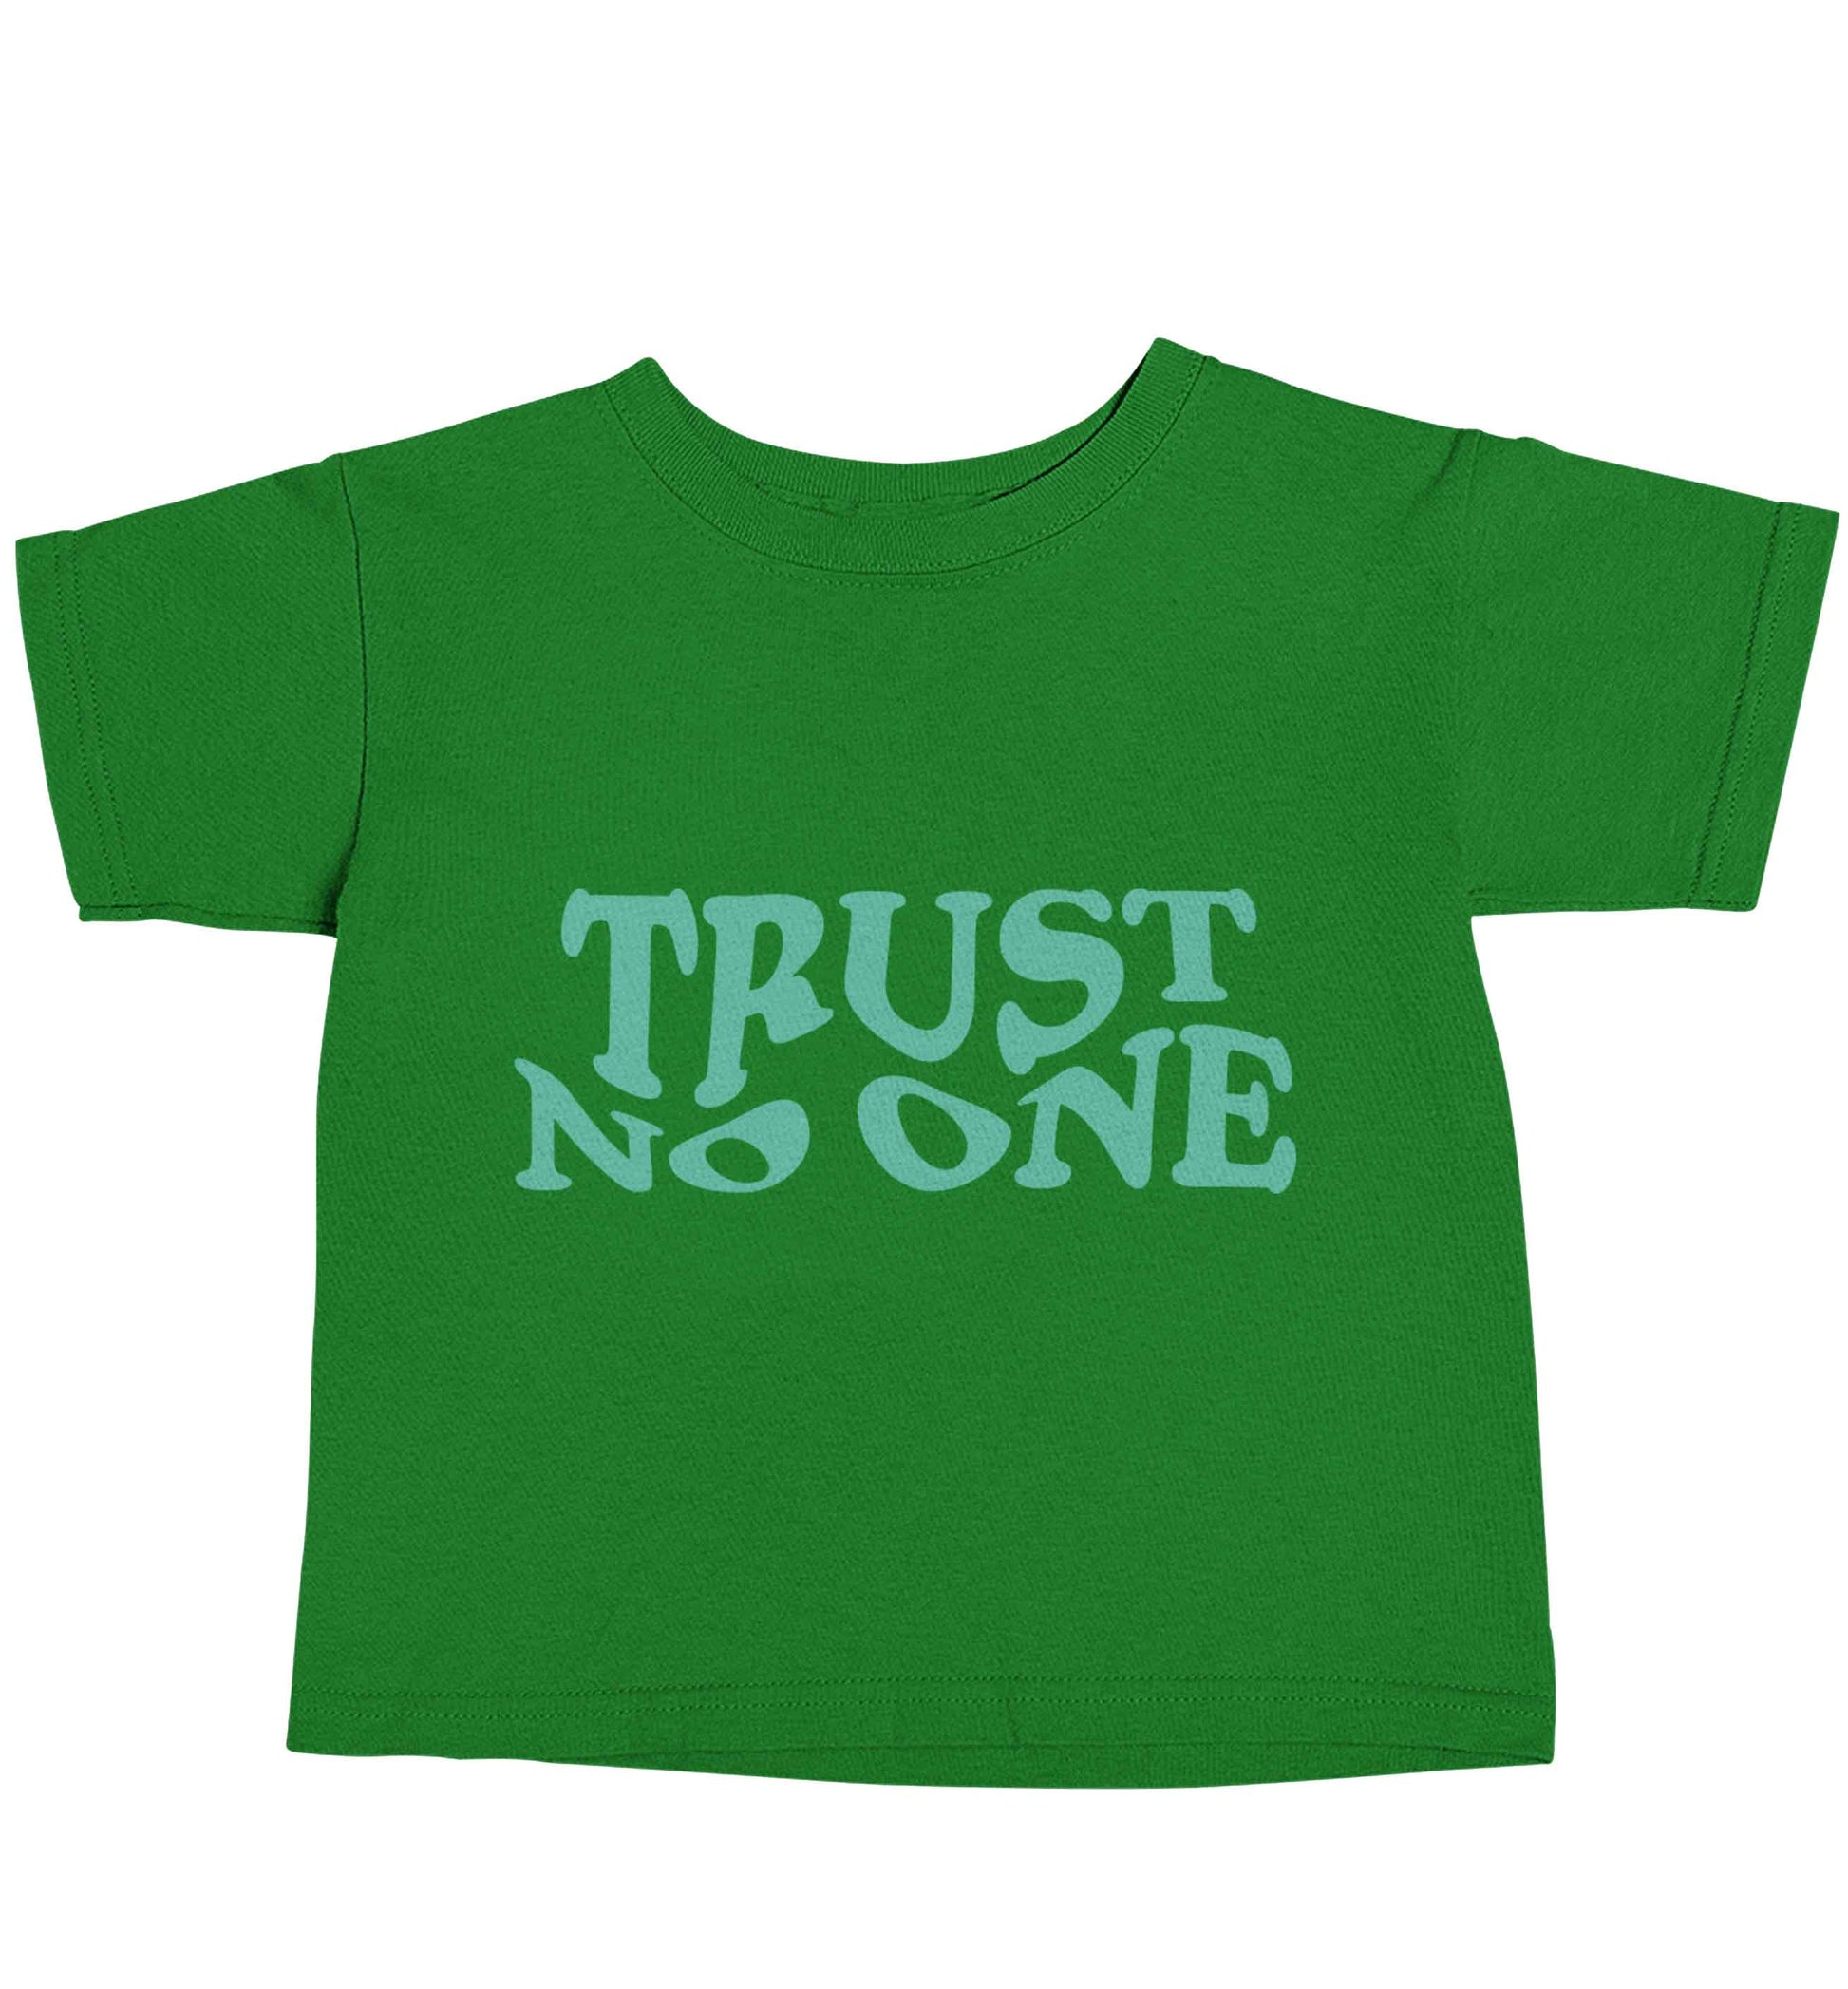 Trust no one green baby toddler Tshirt 2 Years